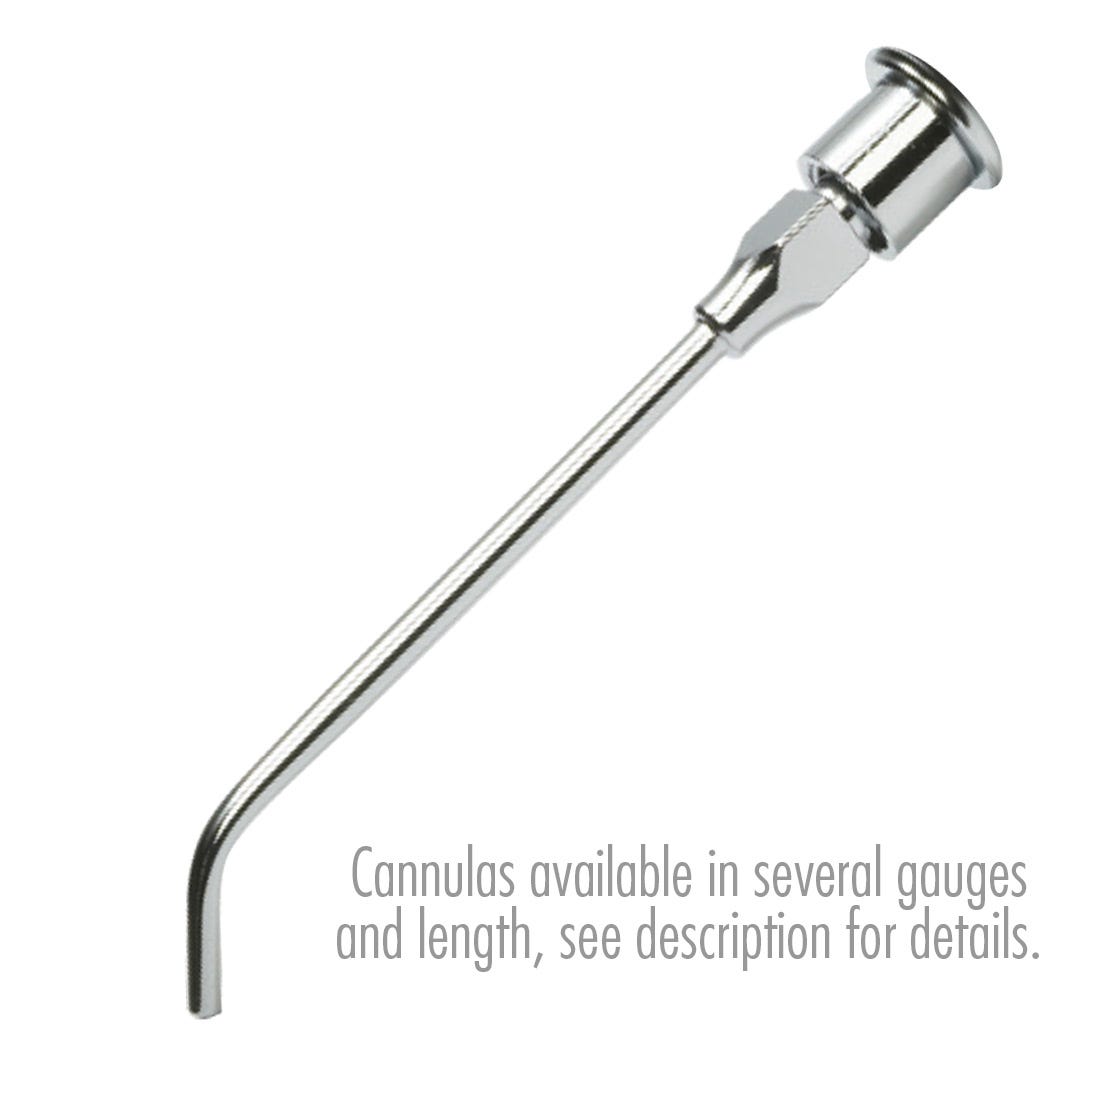 ACE Irrigation Cannula - Stainless Steel 14G x 3", 45 degree angle